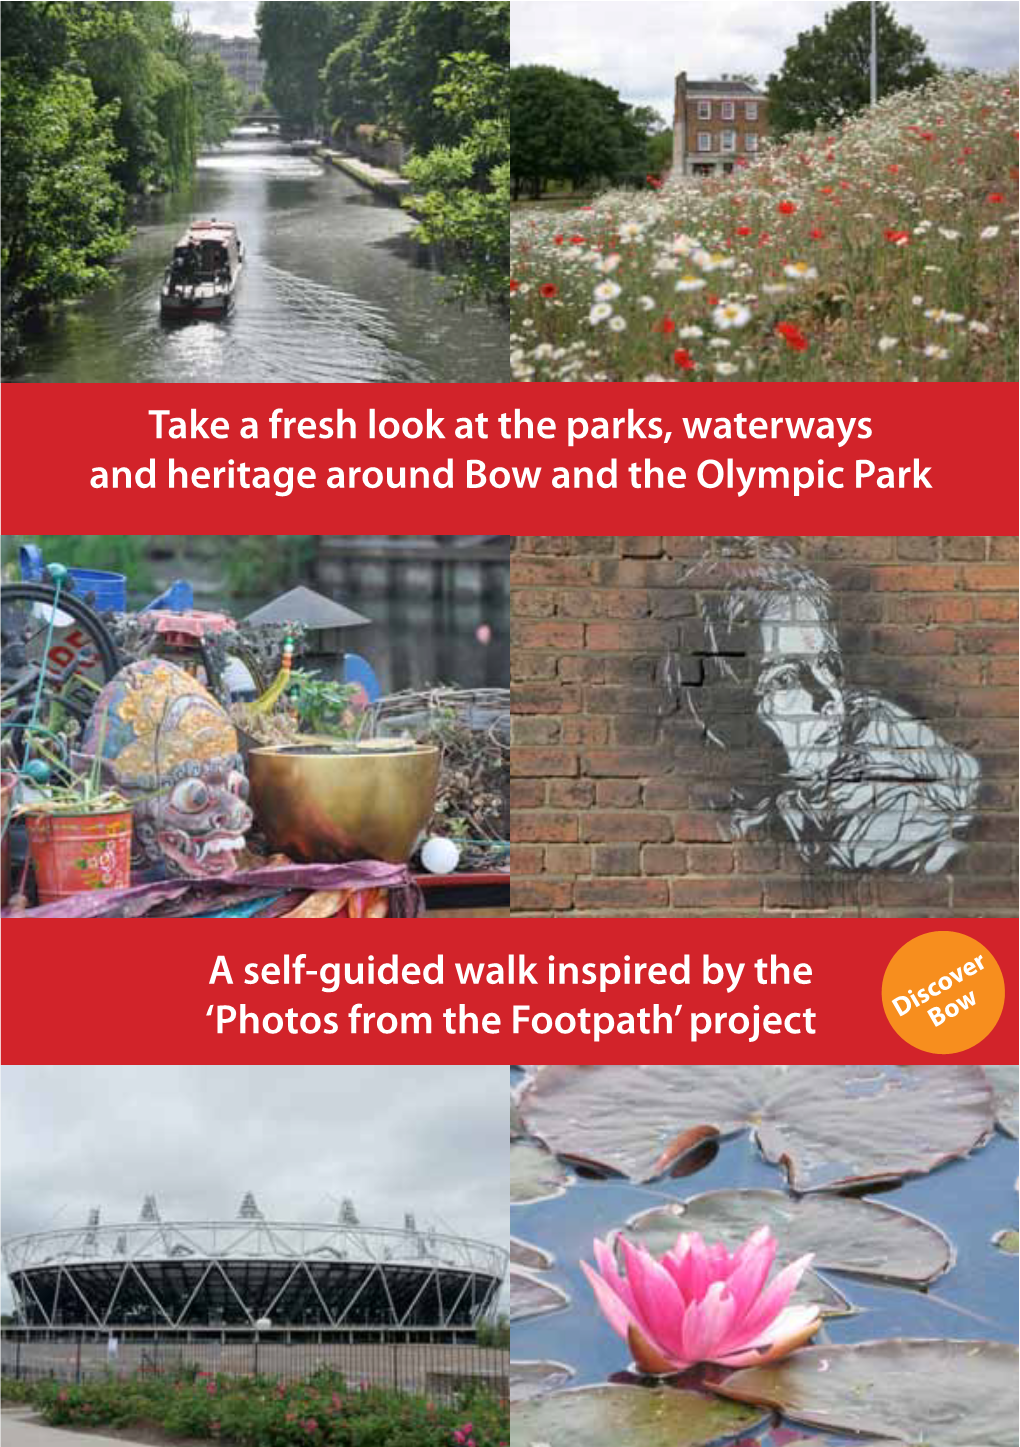 Take a Fresh Look at the Parks, Waterways and Heritage Around Bow and the Olympic Park